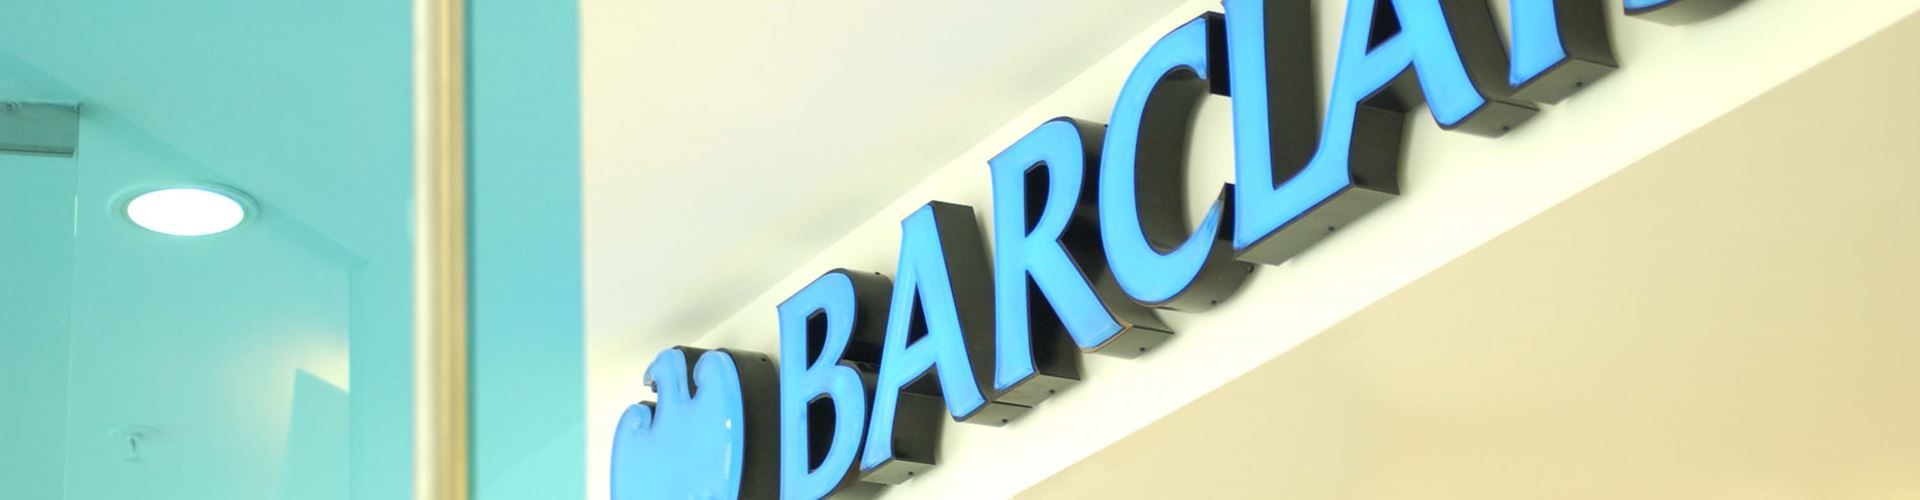 Barclays faces charges for alleged “dark pool” fraud